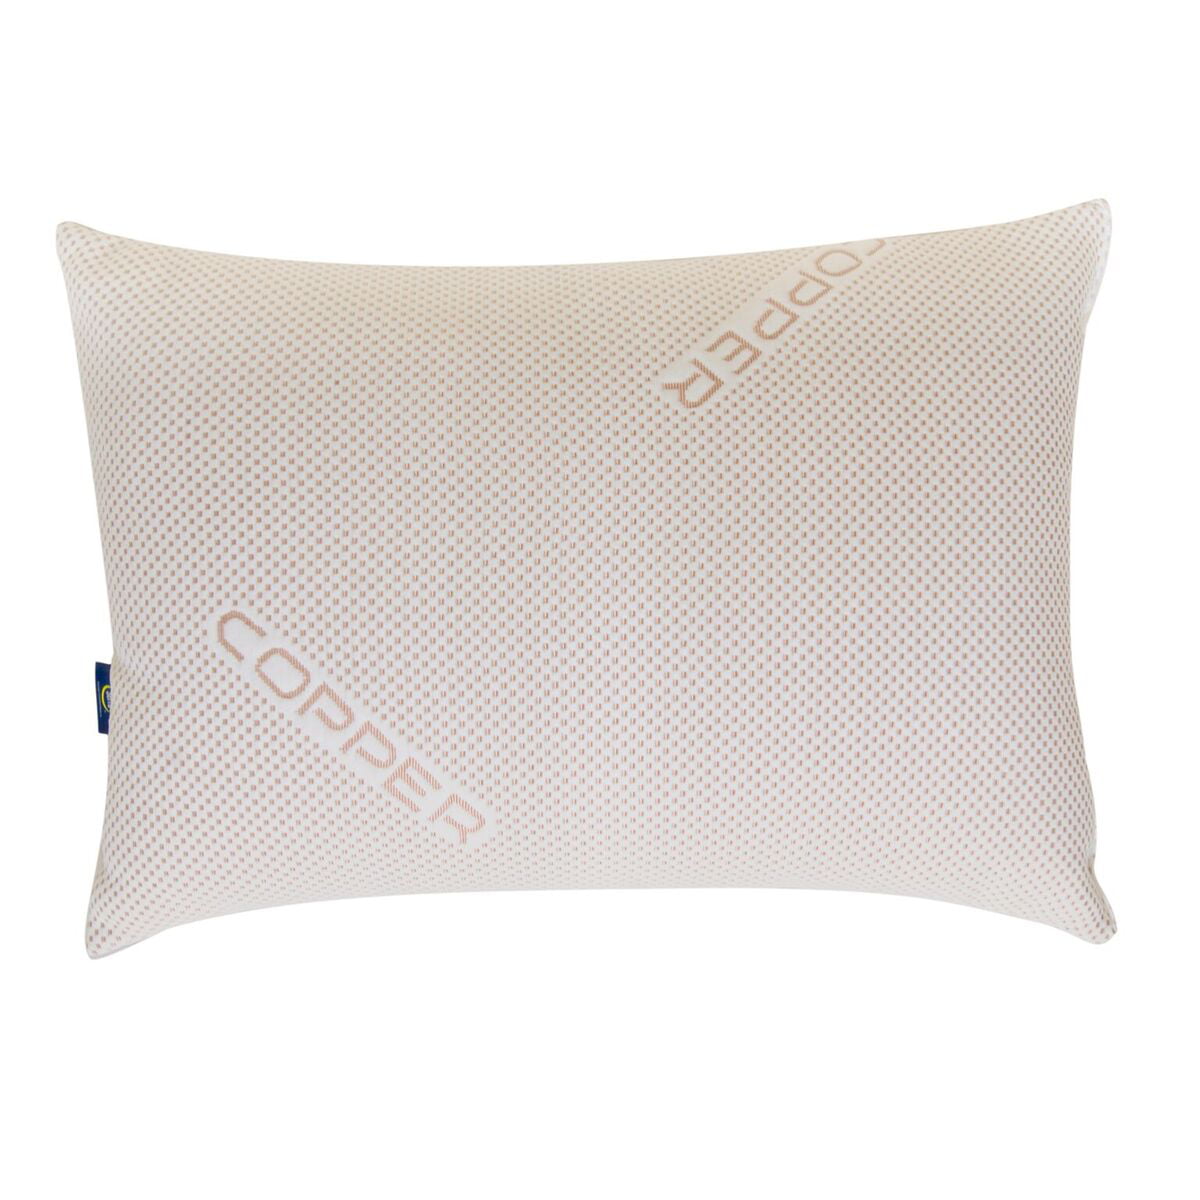 copper fit pillow king